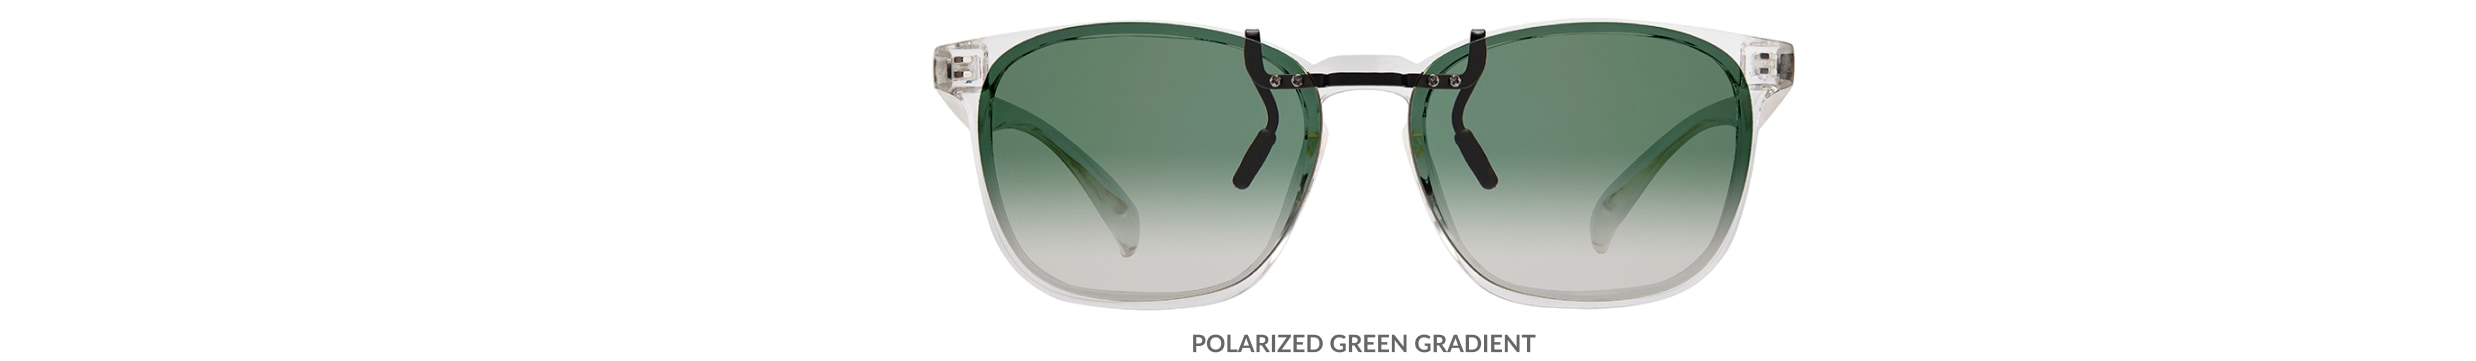 Custom clip-ons. Our polarized custom clip-ons reduce glare and are available for almost any frame. Each clip-on is specially cut to fit the frame with prices starting at just $3.95  (Compare to $50). Zenni square glasses #2020123 in clear, shown with gradient green polarized custom clip-on.